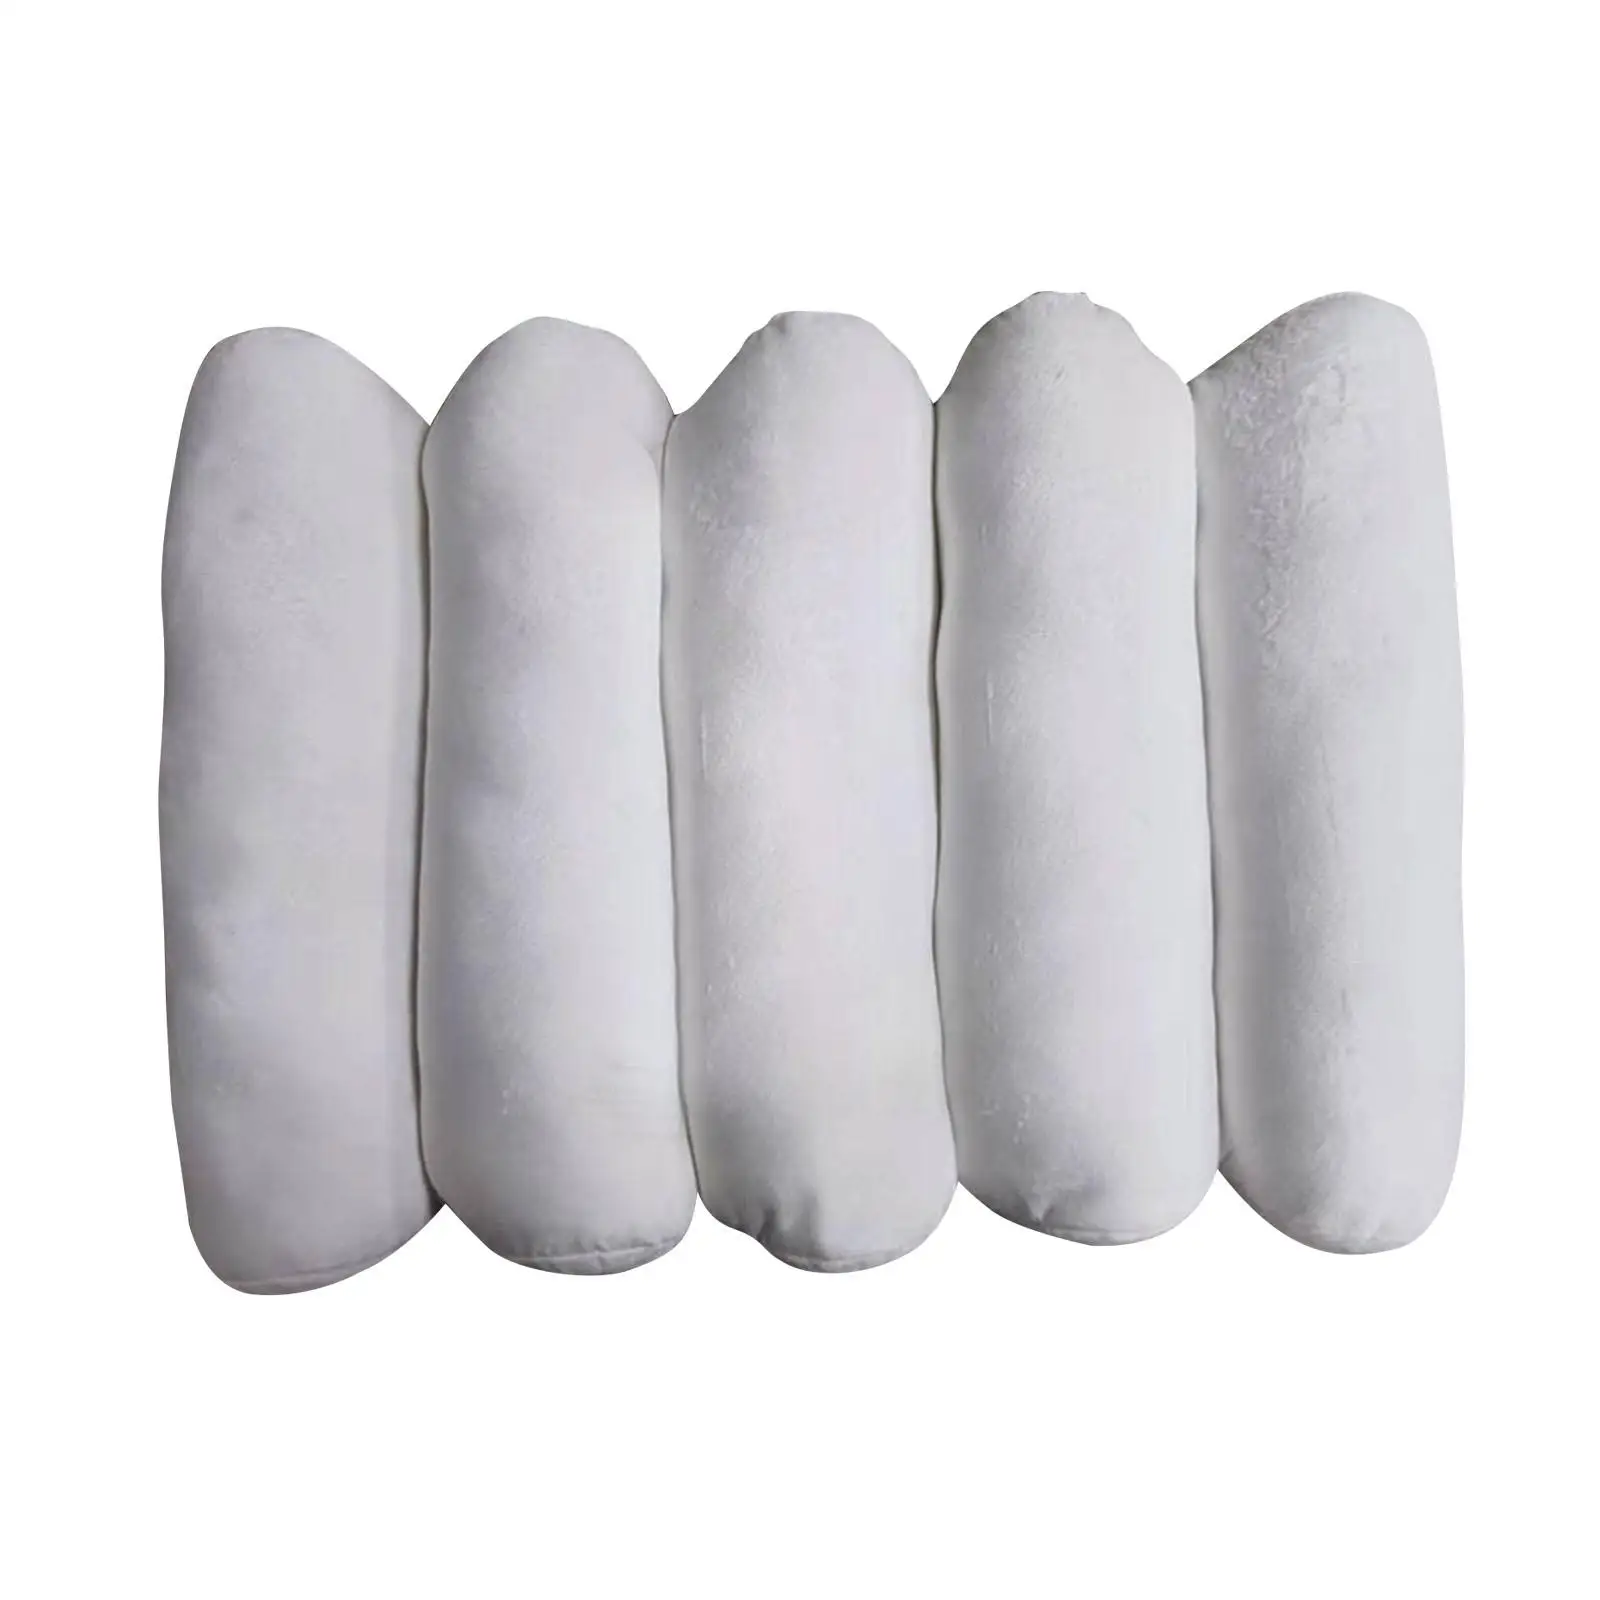 Cushion PP Pad Seat Cushions for Couch Back Coccyx Indoor Decorative Tailbone